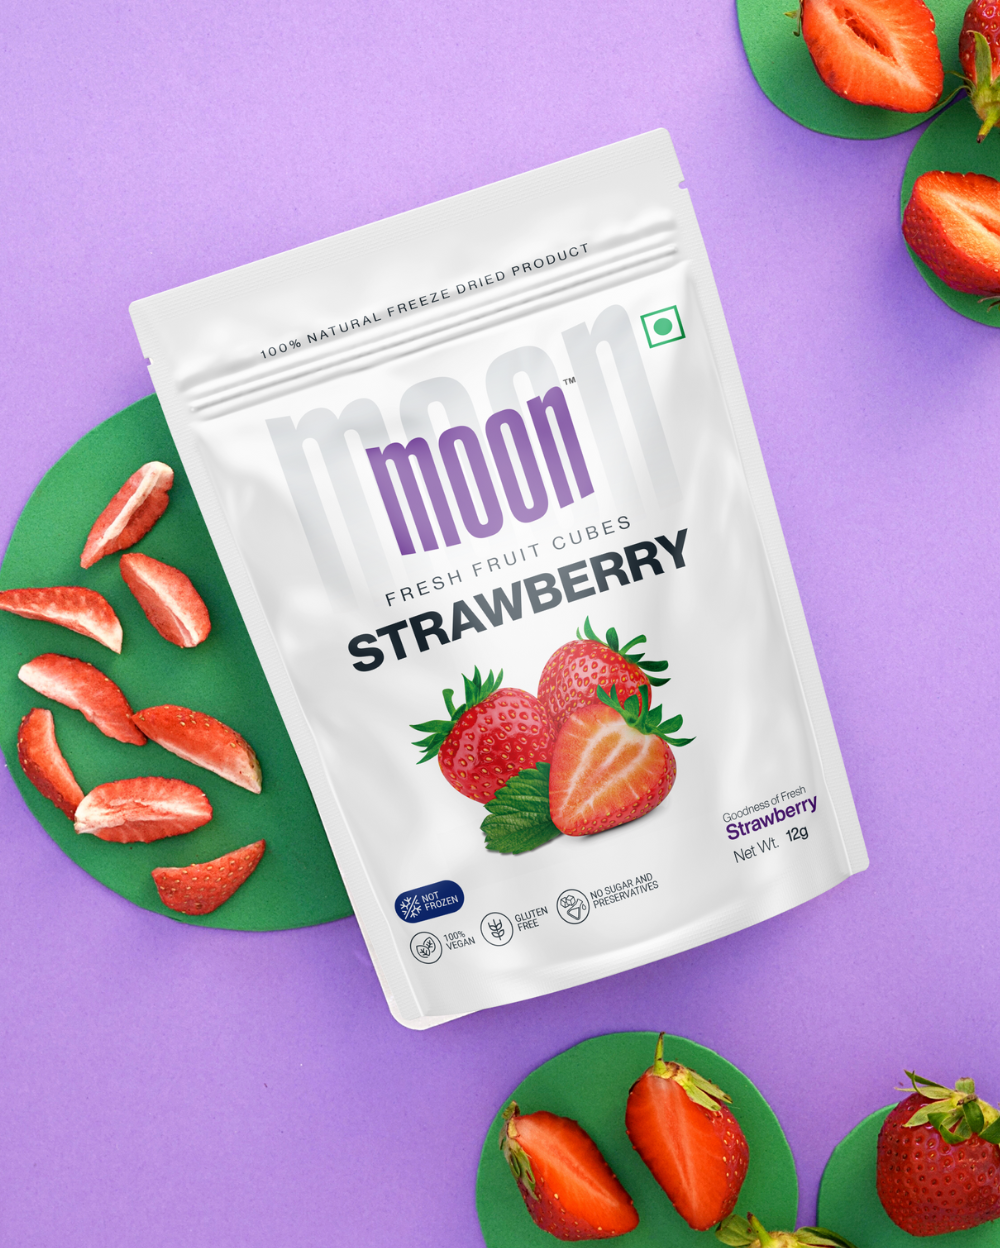 A bag of "MOONFREEZE FOODS PRIVATE LIMITED Moon Freeze Dried Strawberry + Jamun Cubes" product on a purple background surrounded by fresh strawberry slices.